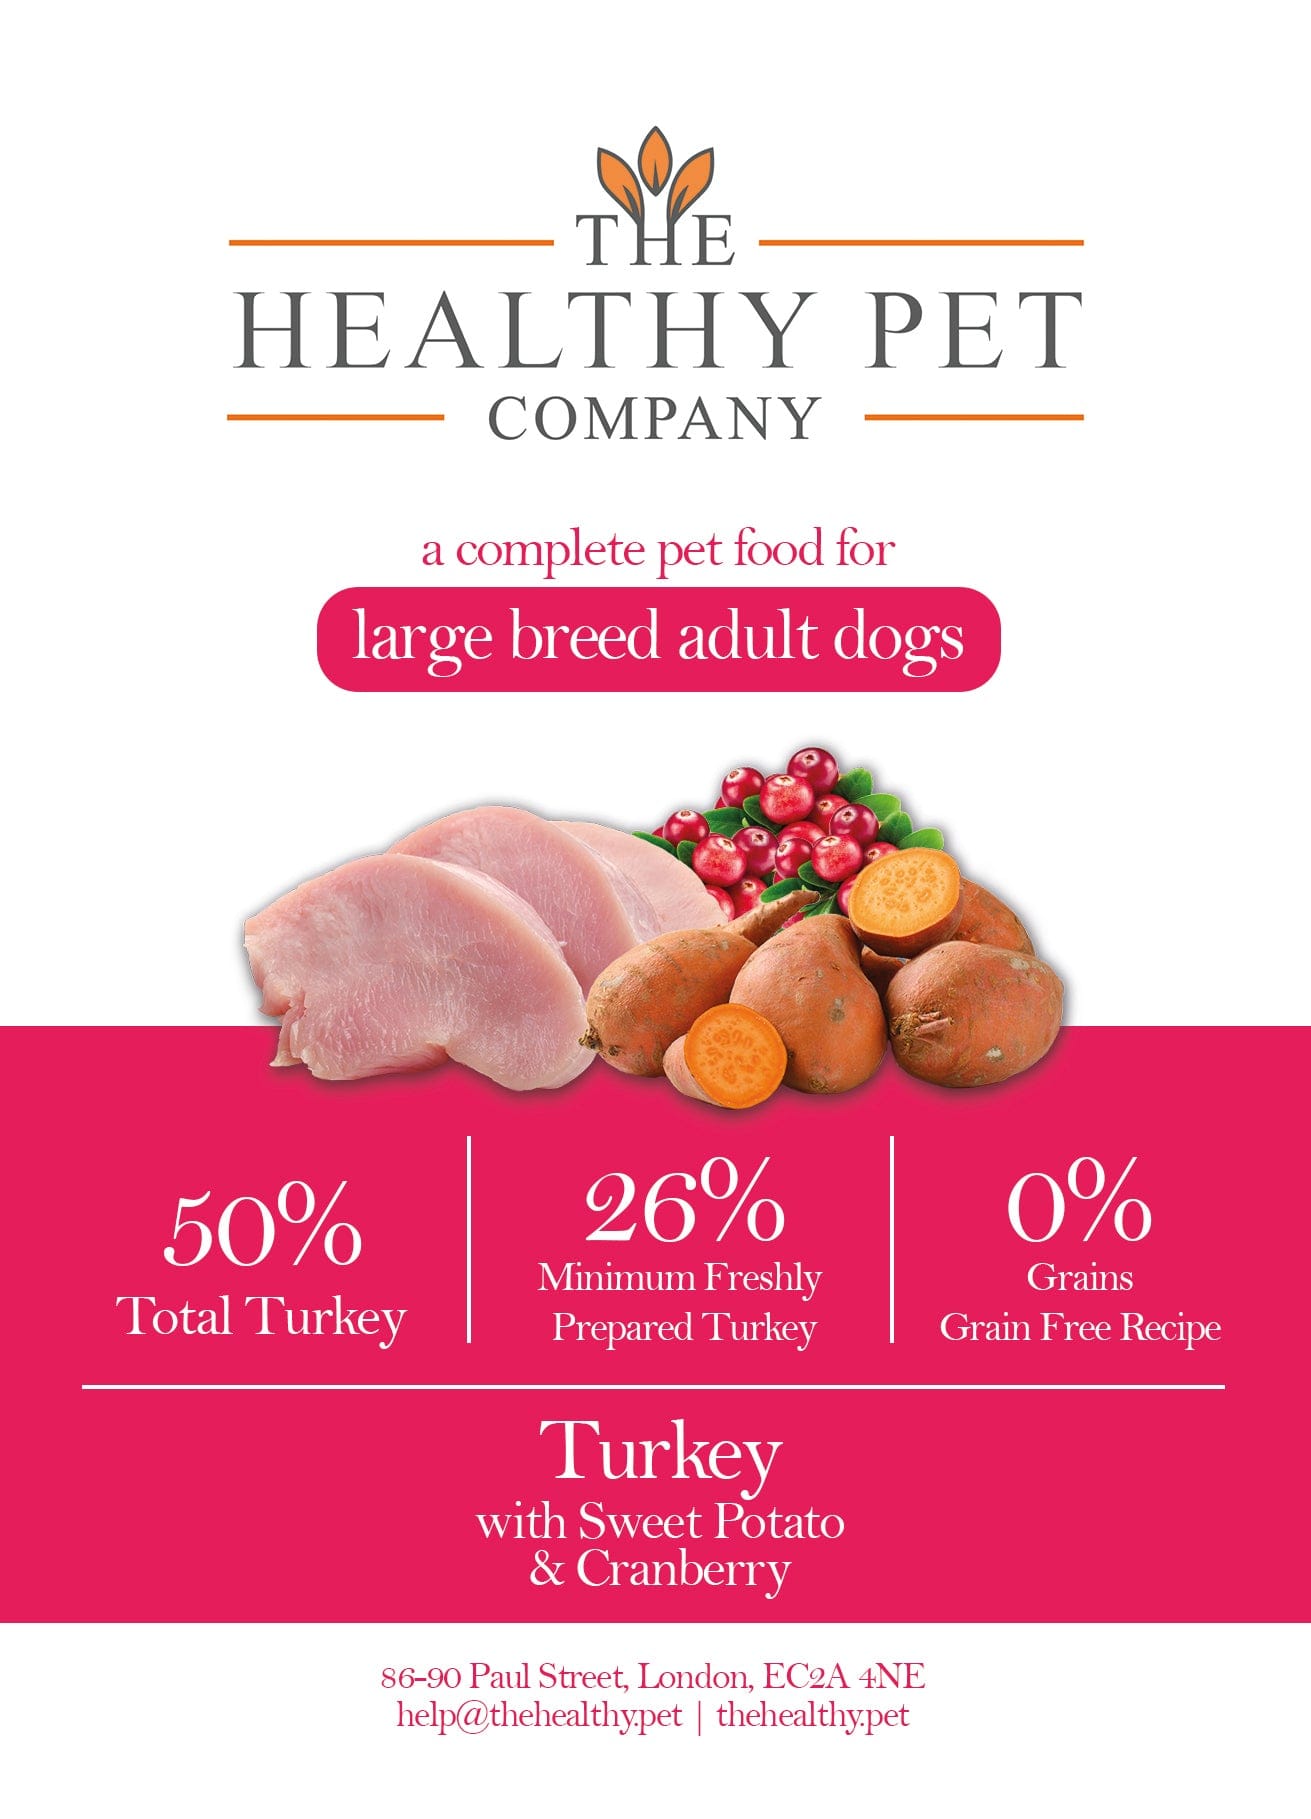 The Healthy Pet Company Complete Meal - Turkey & Sweet Potato for Large Breed Adult Dogs - The Healthy Pet Company